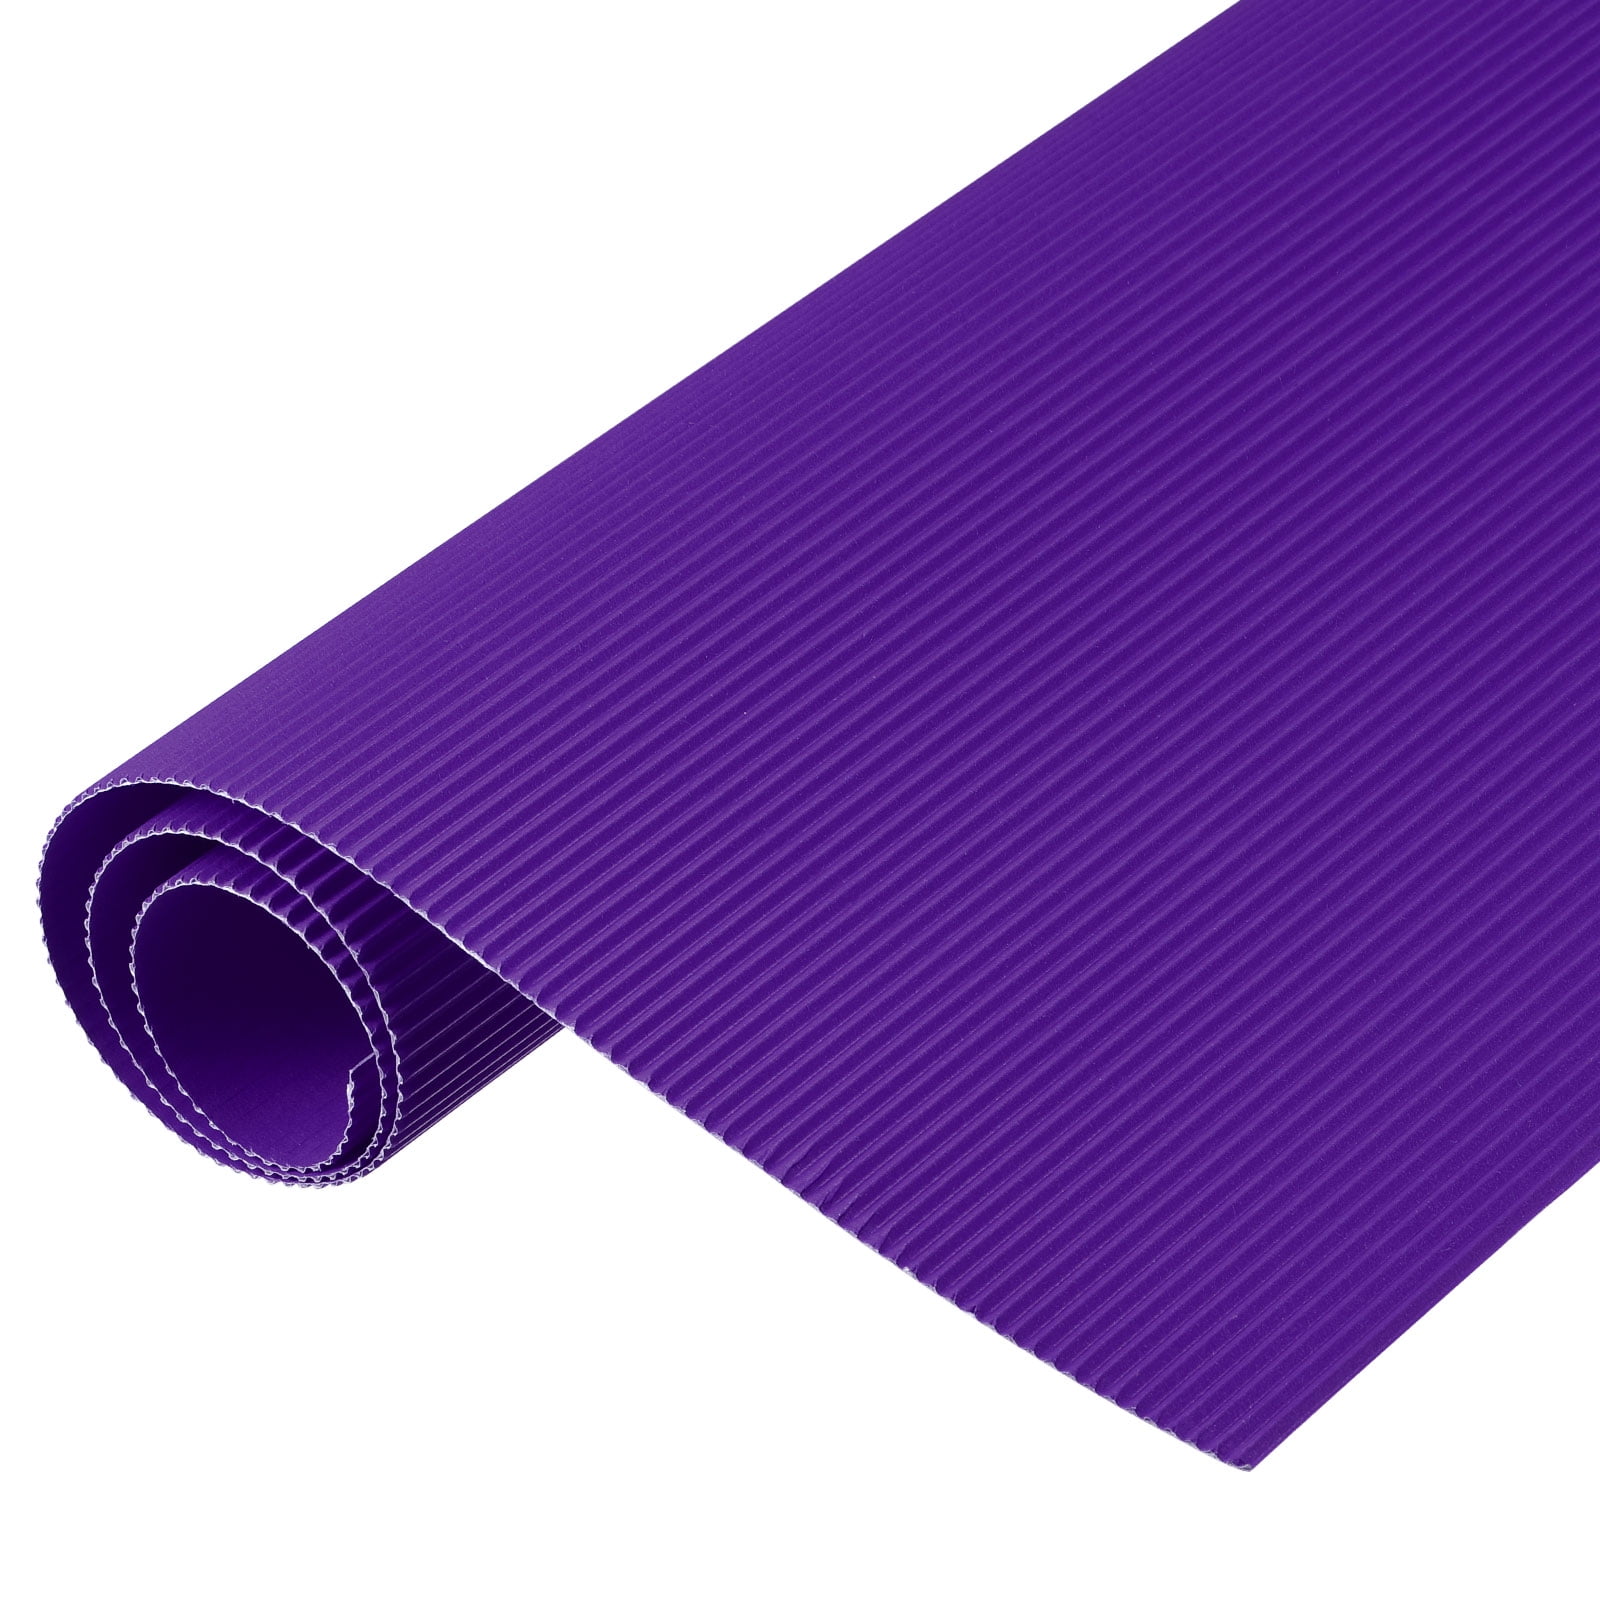 Clear Path Paper Favorites 12 x 24 inch Purple Smooth Cardstock 65lb Cover (55 Sheets)